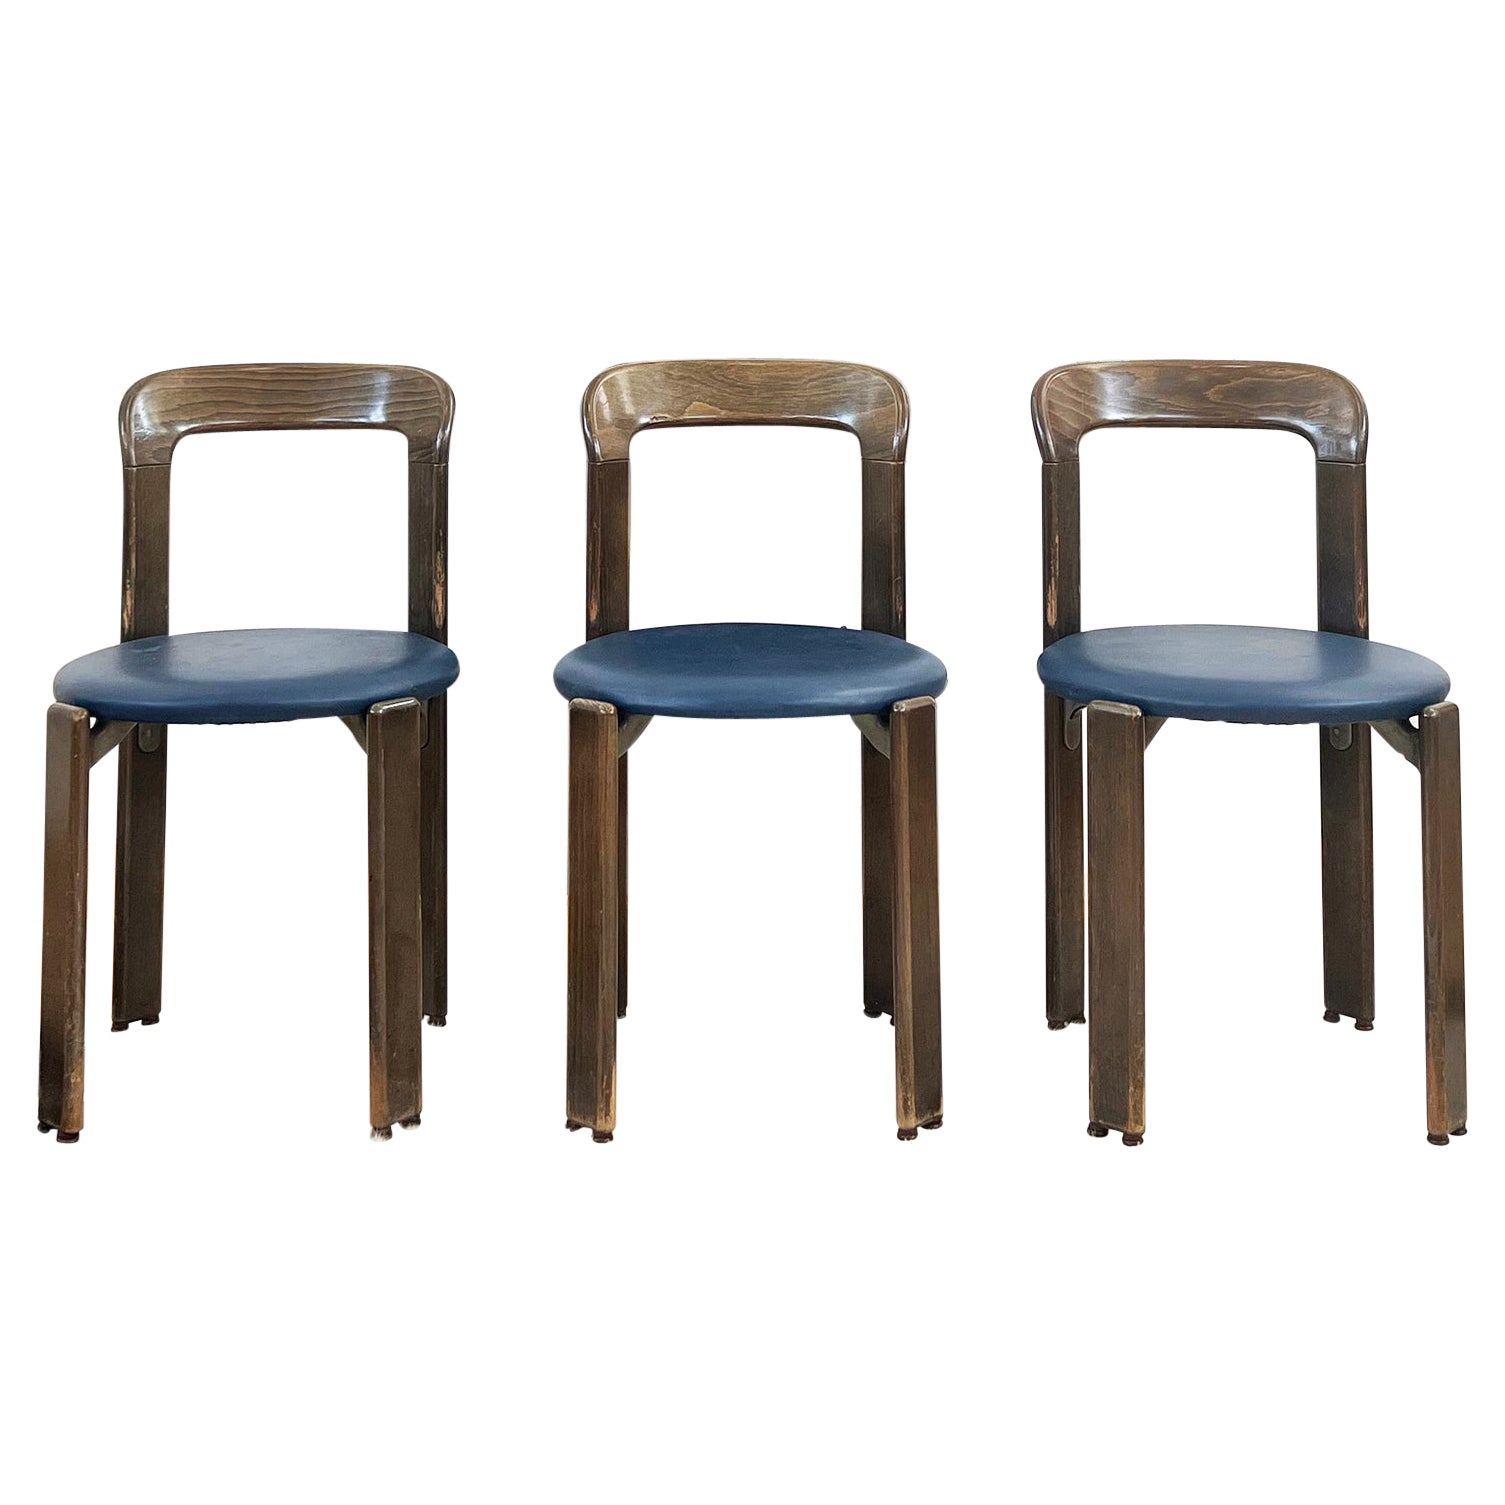 1970s Postmodern Stackable Dining Chairs by Bruno Rey for Dietiker, Set of 3